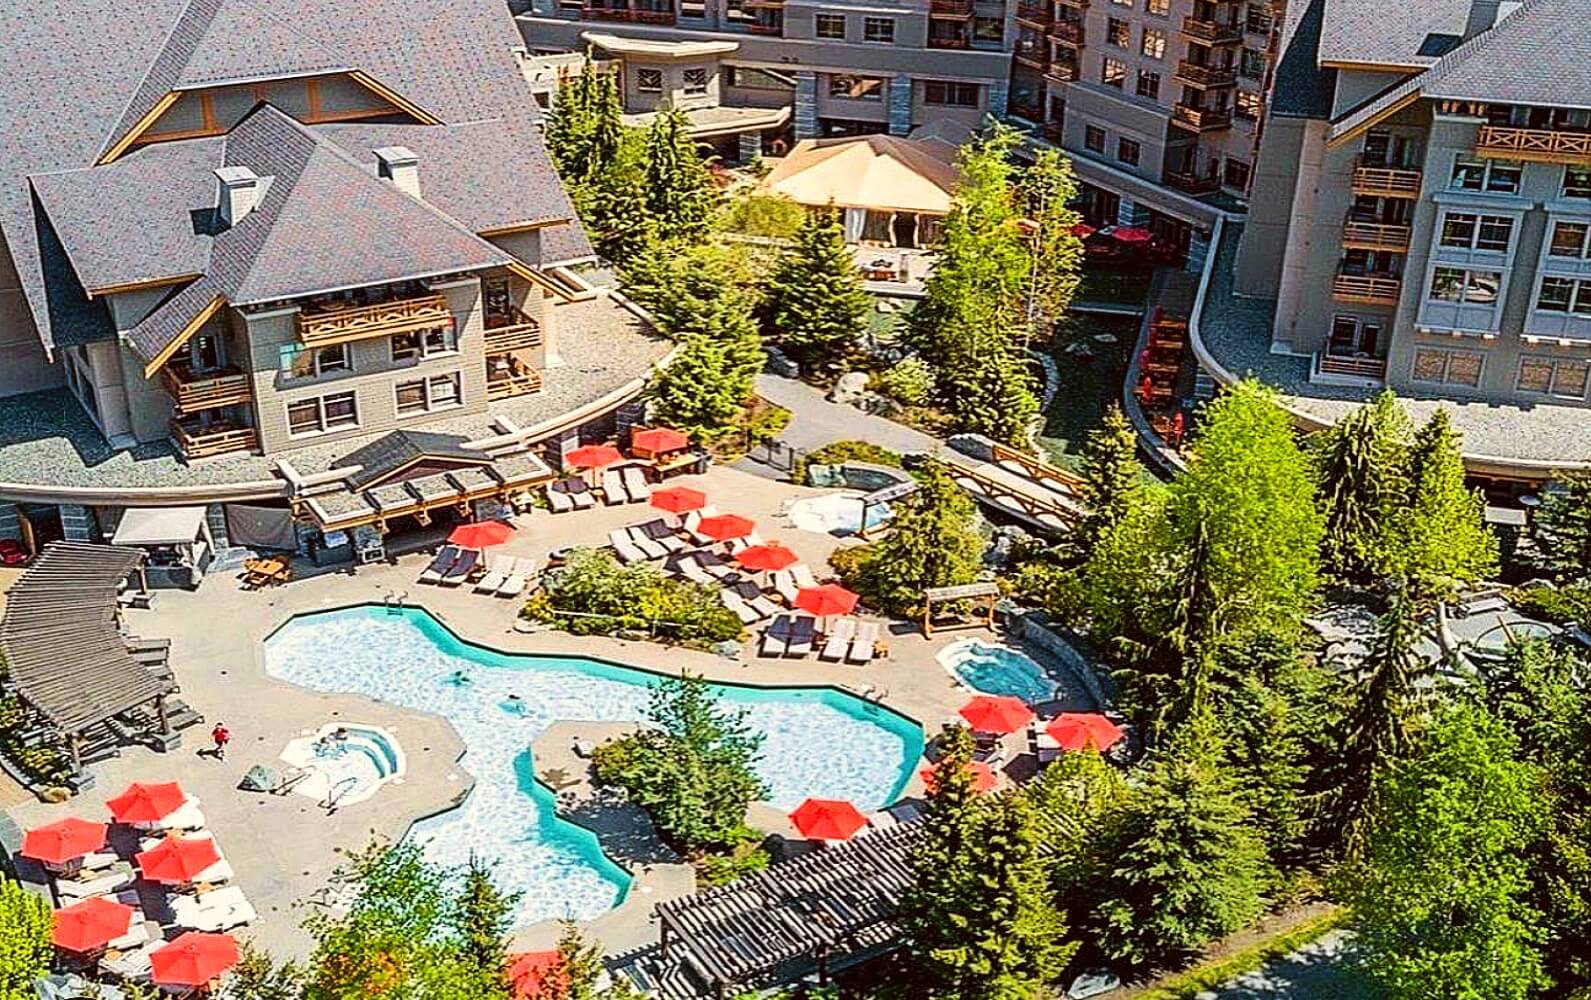 An overview of the Four Seasons Resort Whistler